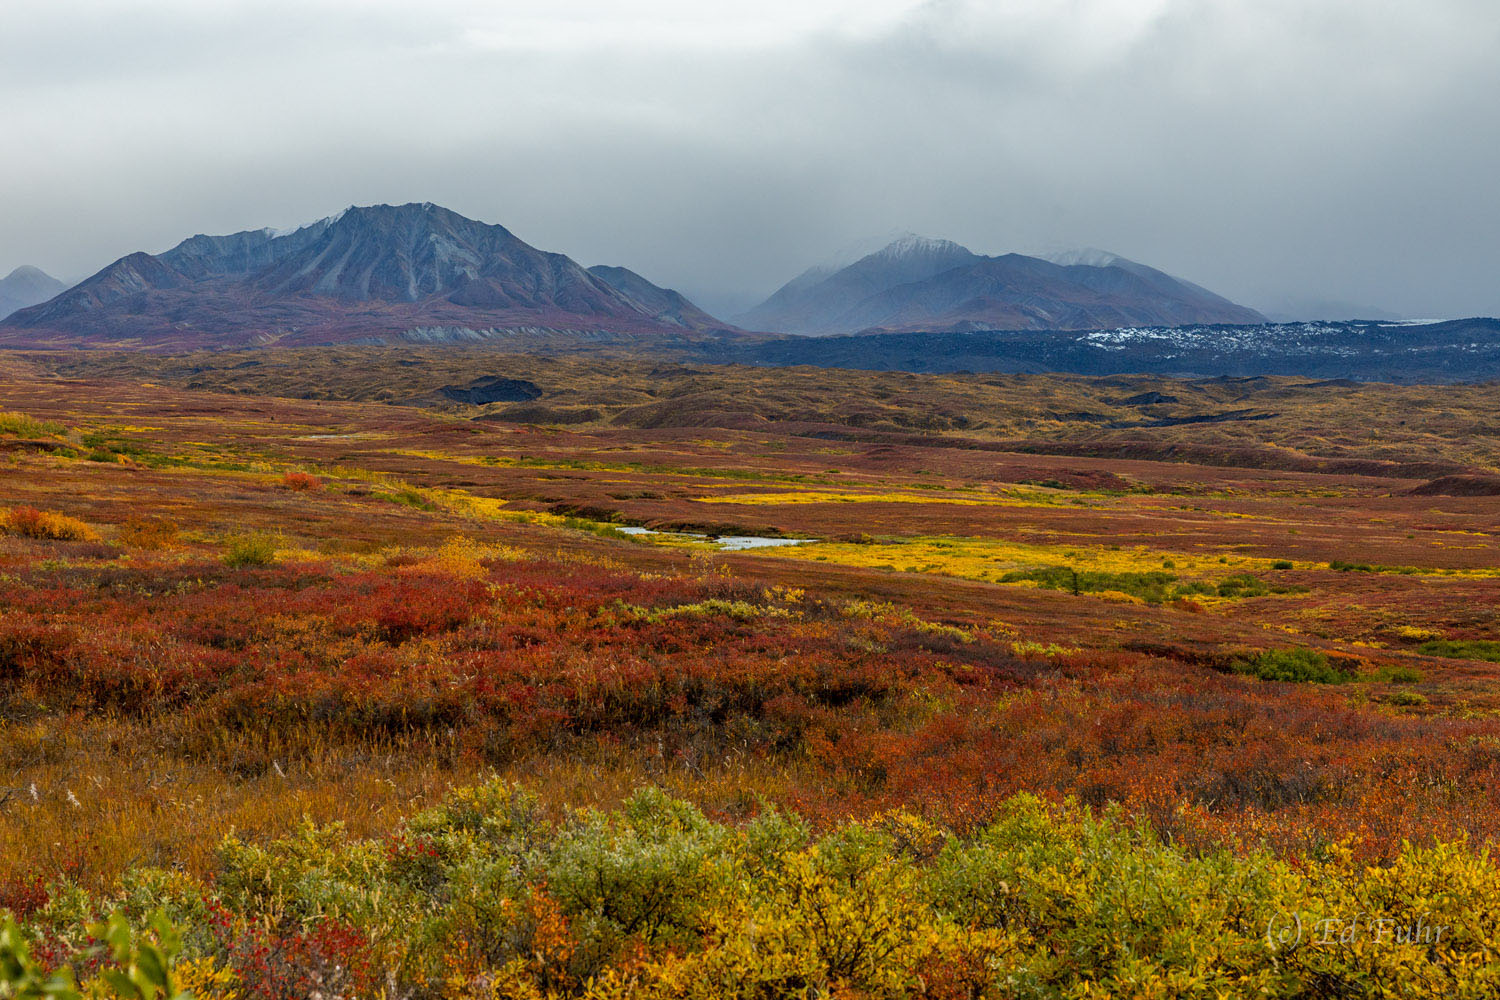 Flowing some 40 miles from Denali's northeastern slopes, Muldrow Glacier cuts though the autumn tundra.